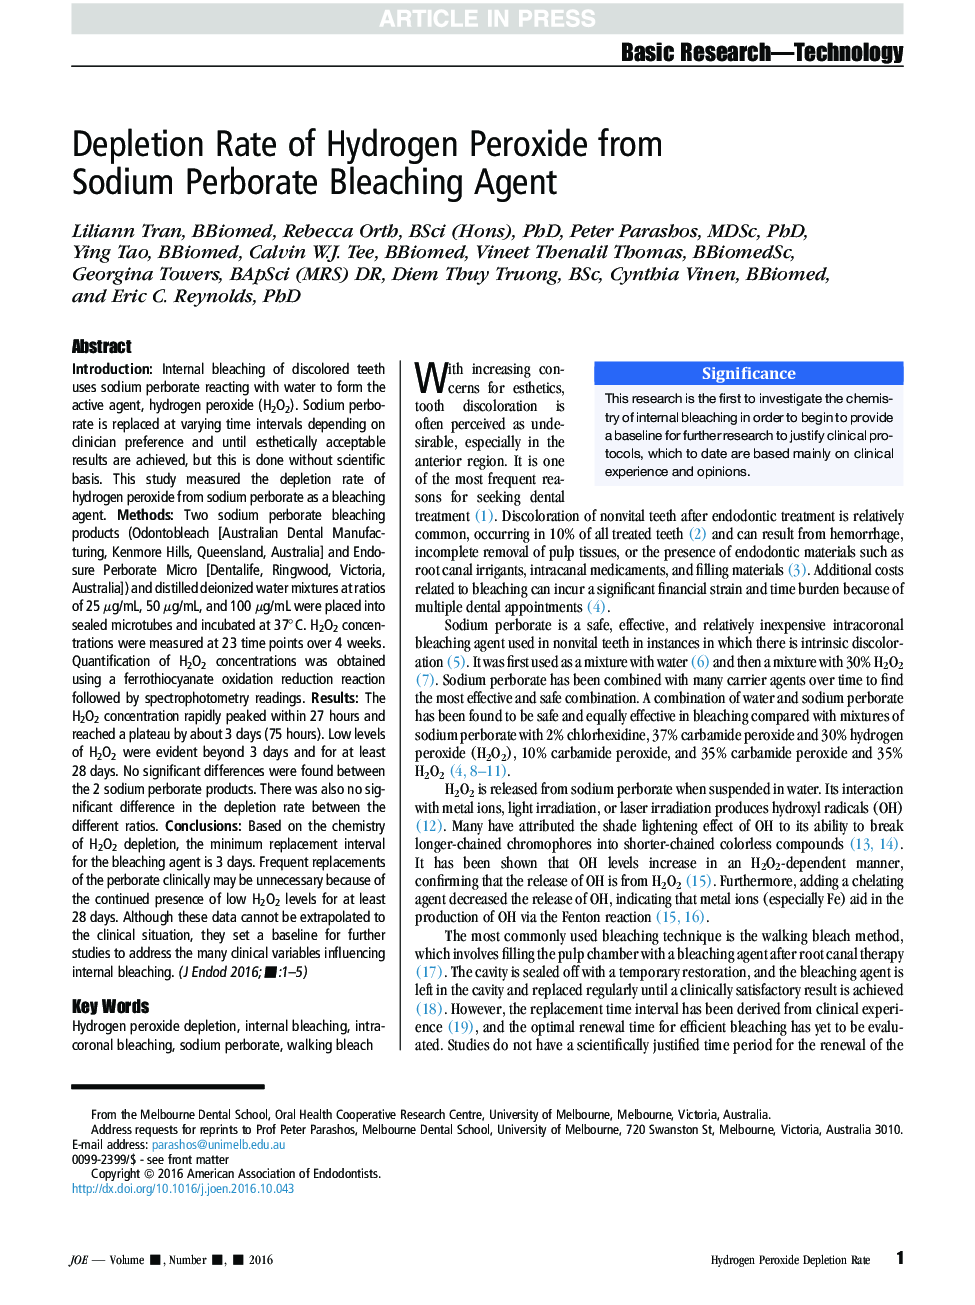 Depletion Rate of Hydrogen Peroxide from Sodium Perborate Bleaching Agent